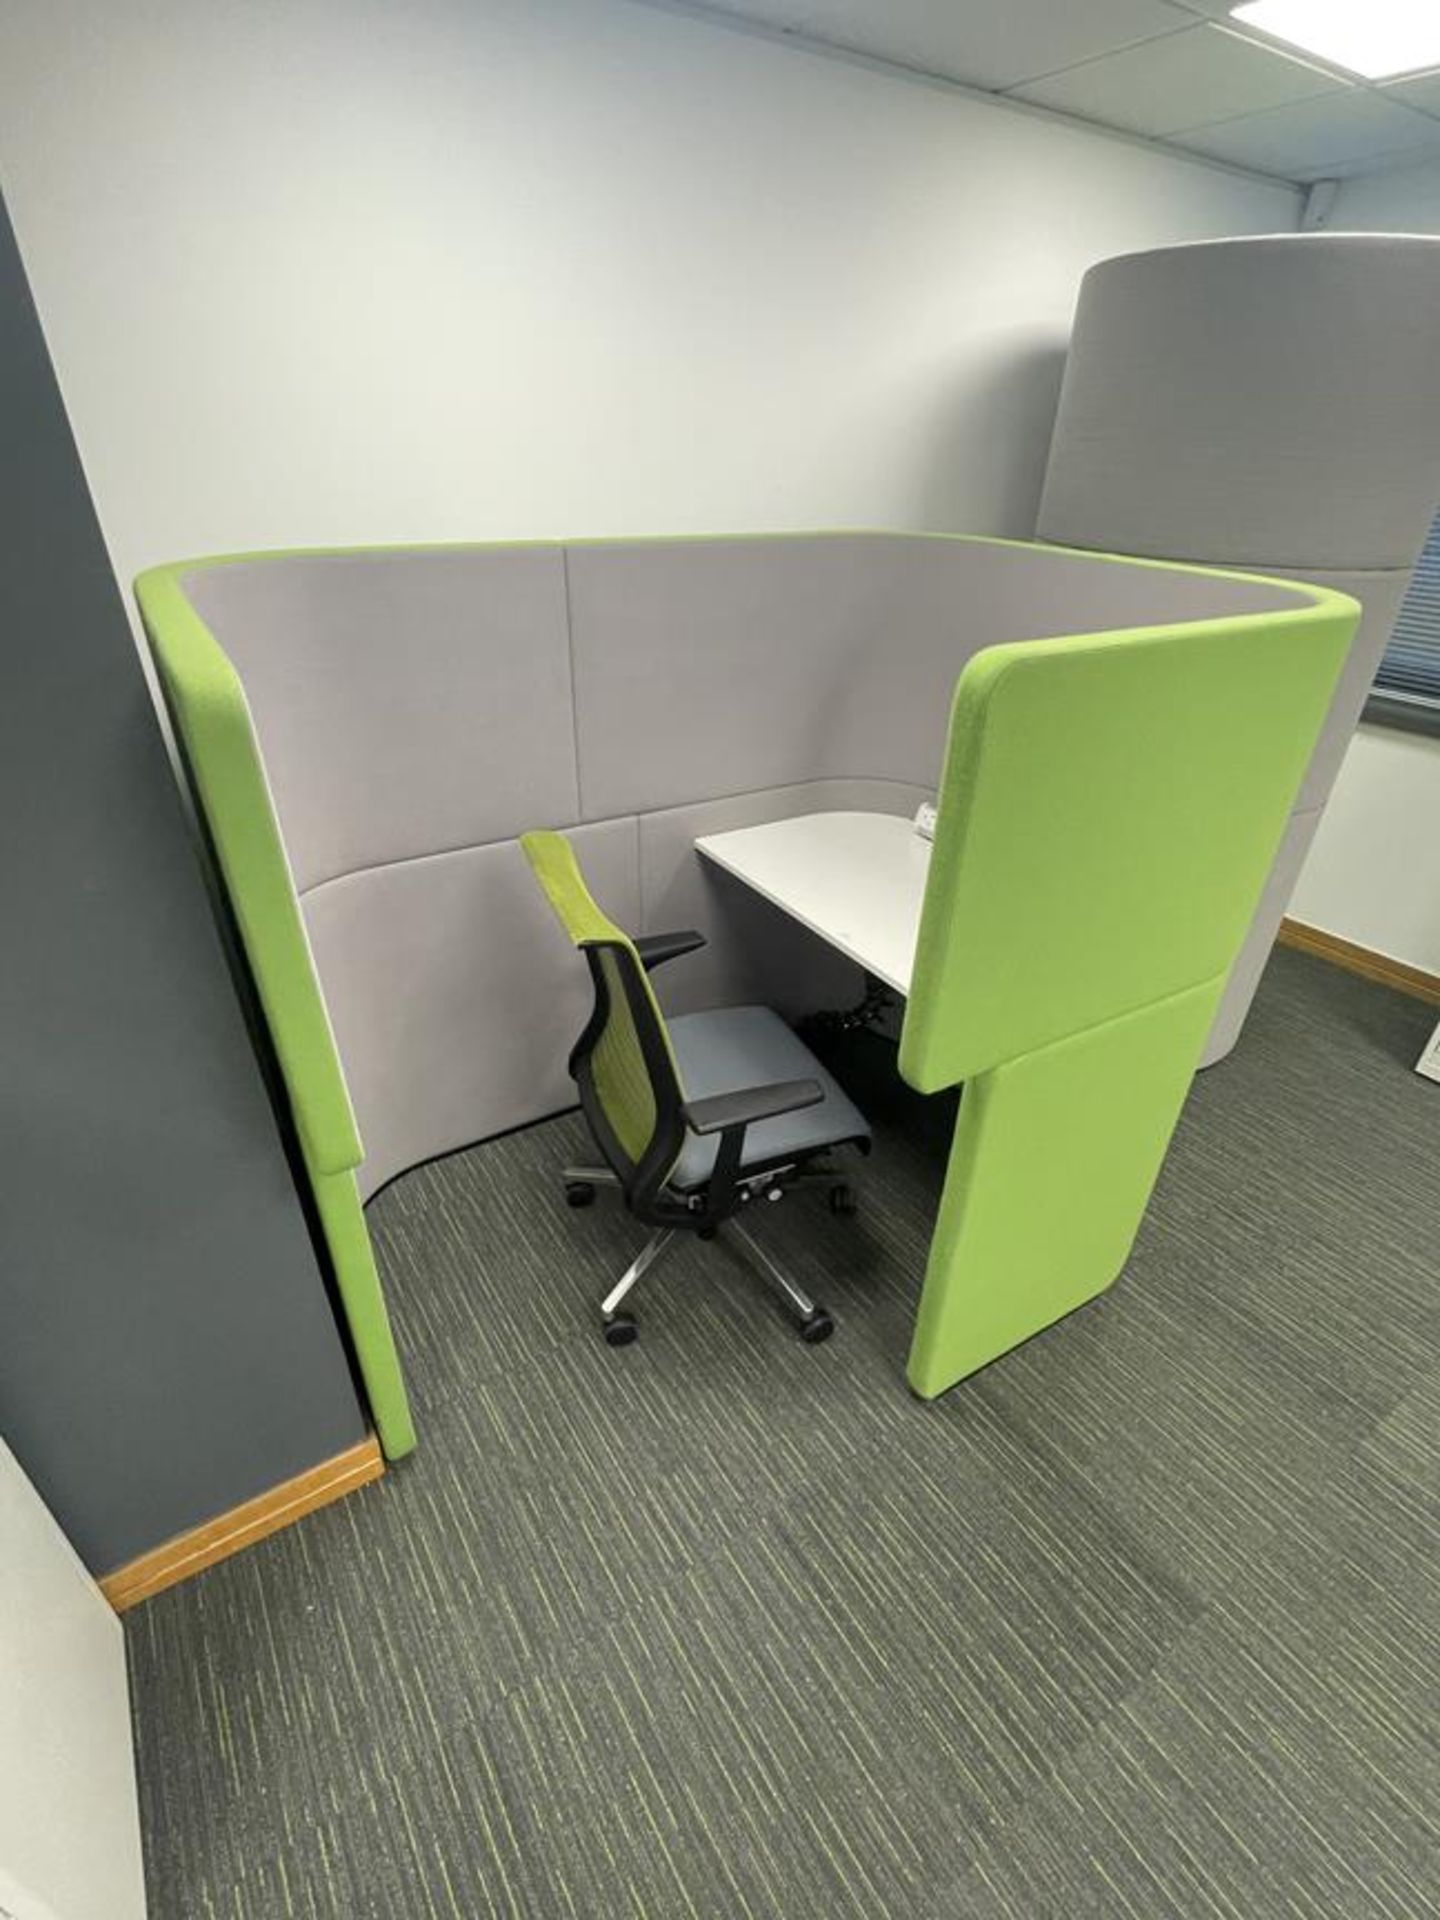 Bene Green/Grey Upholstered Privacy Desk Pod with Swivel Chair, Lamp and Desk Power (GB REF#134)